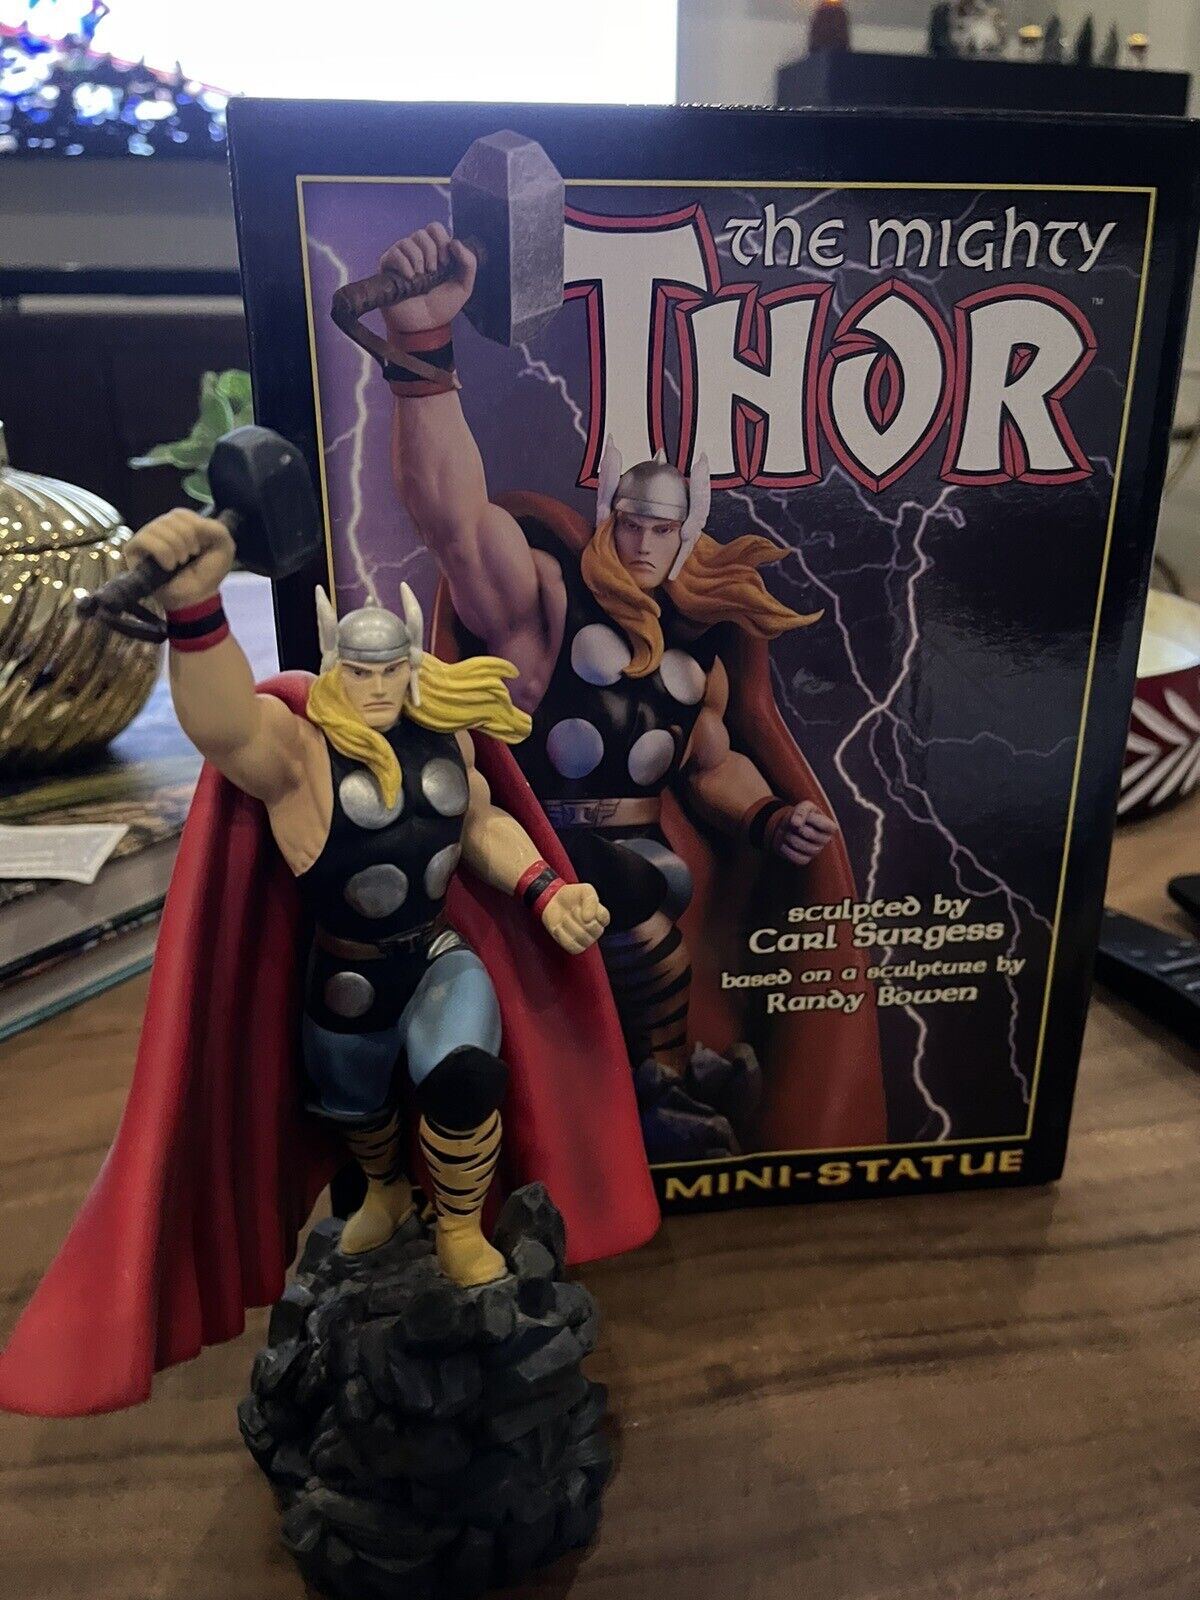 Limited Edition Thor Mini Statue Sculpted By Carl Surgess